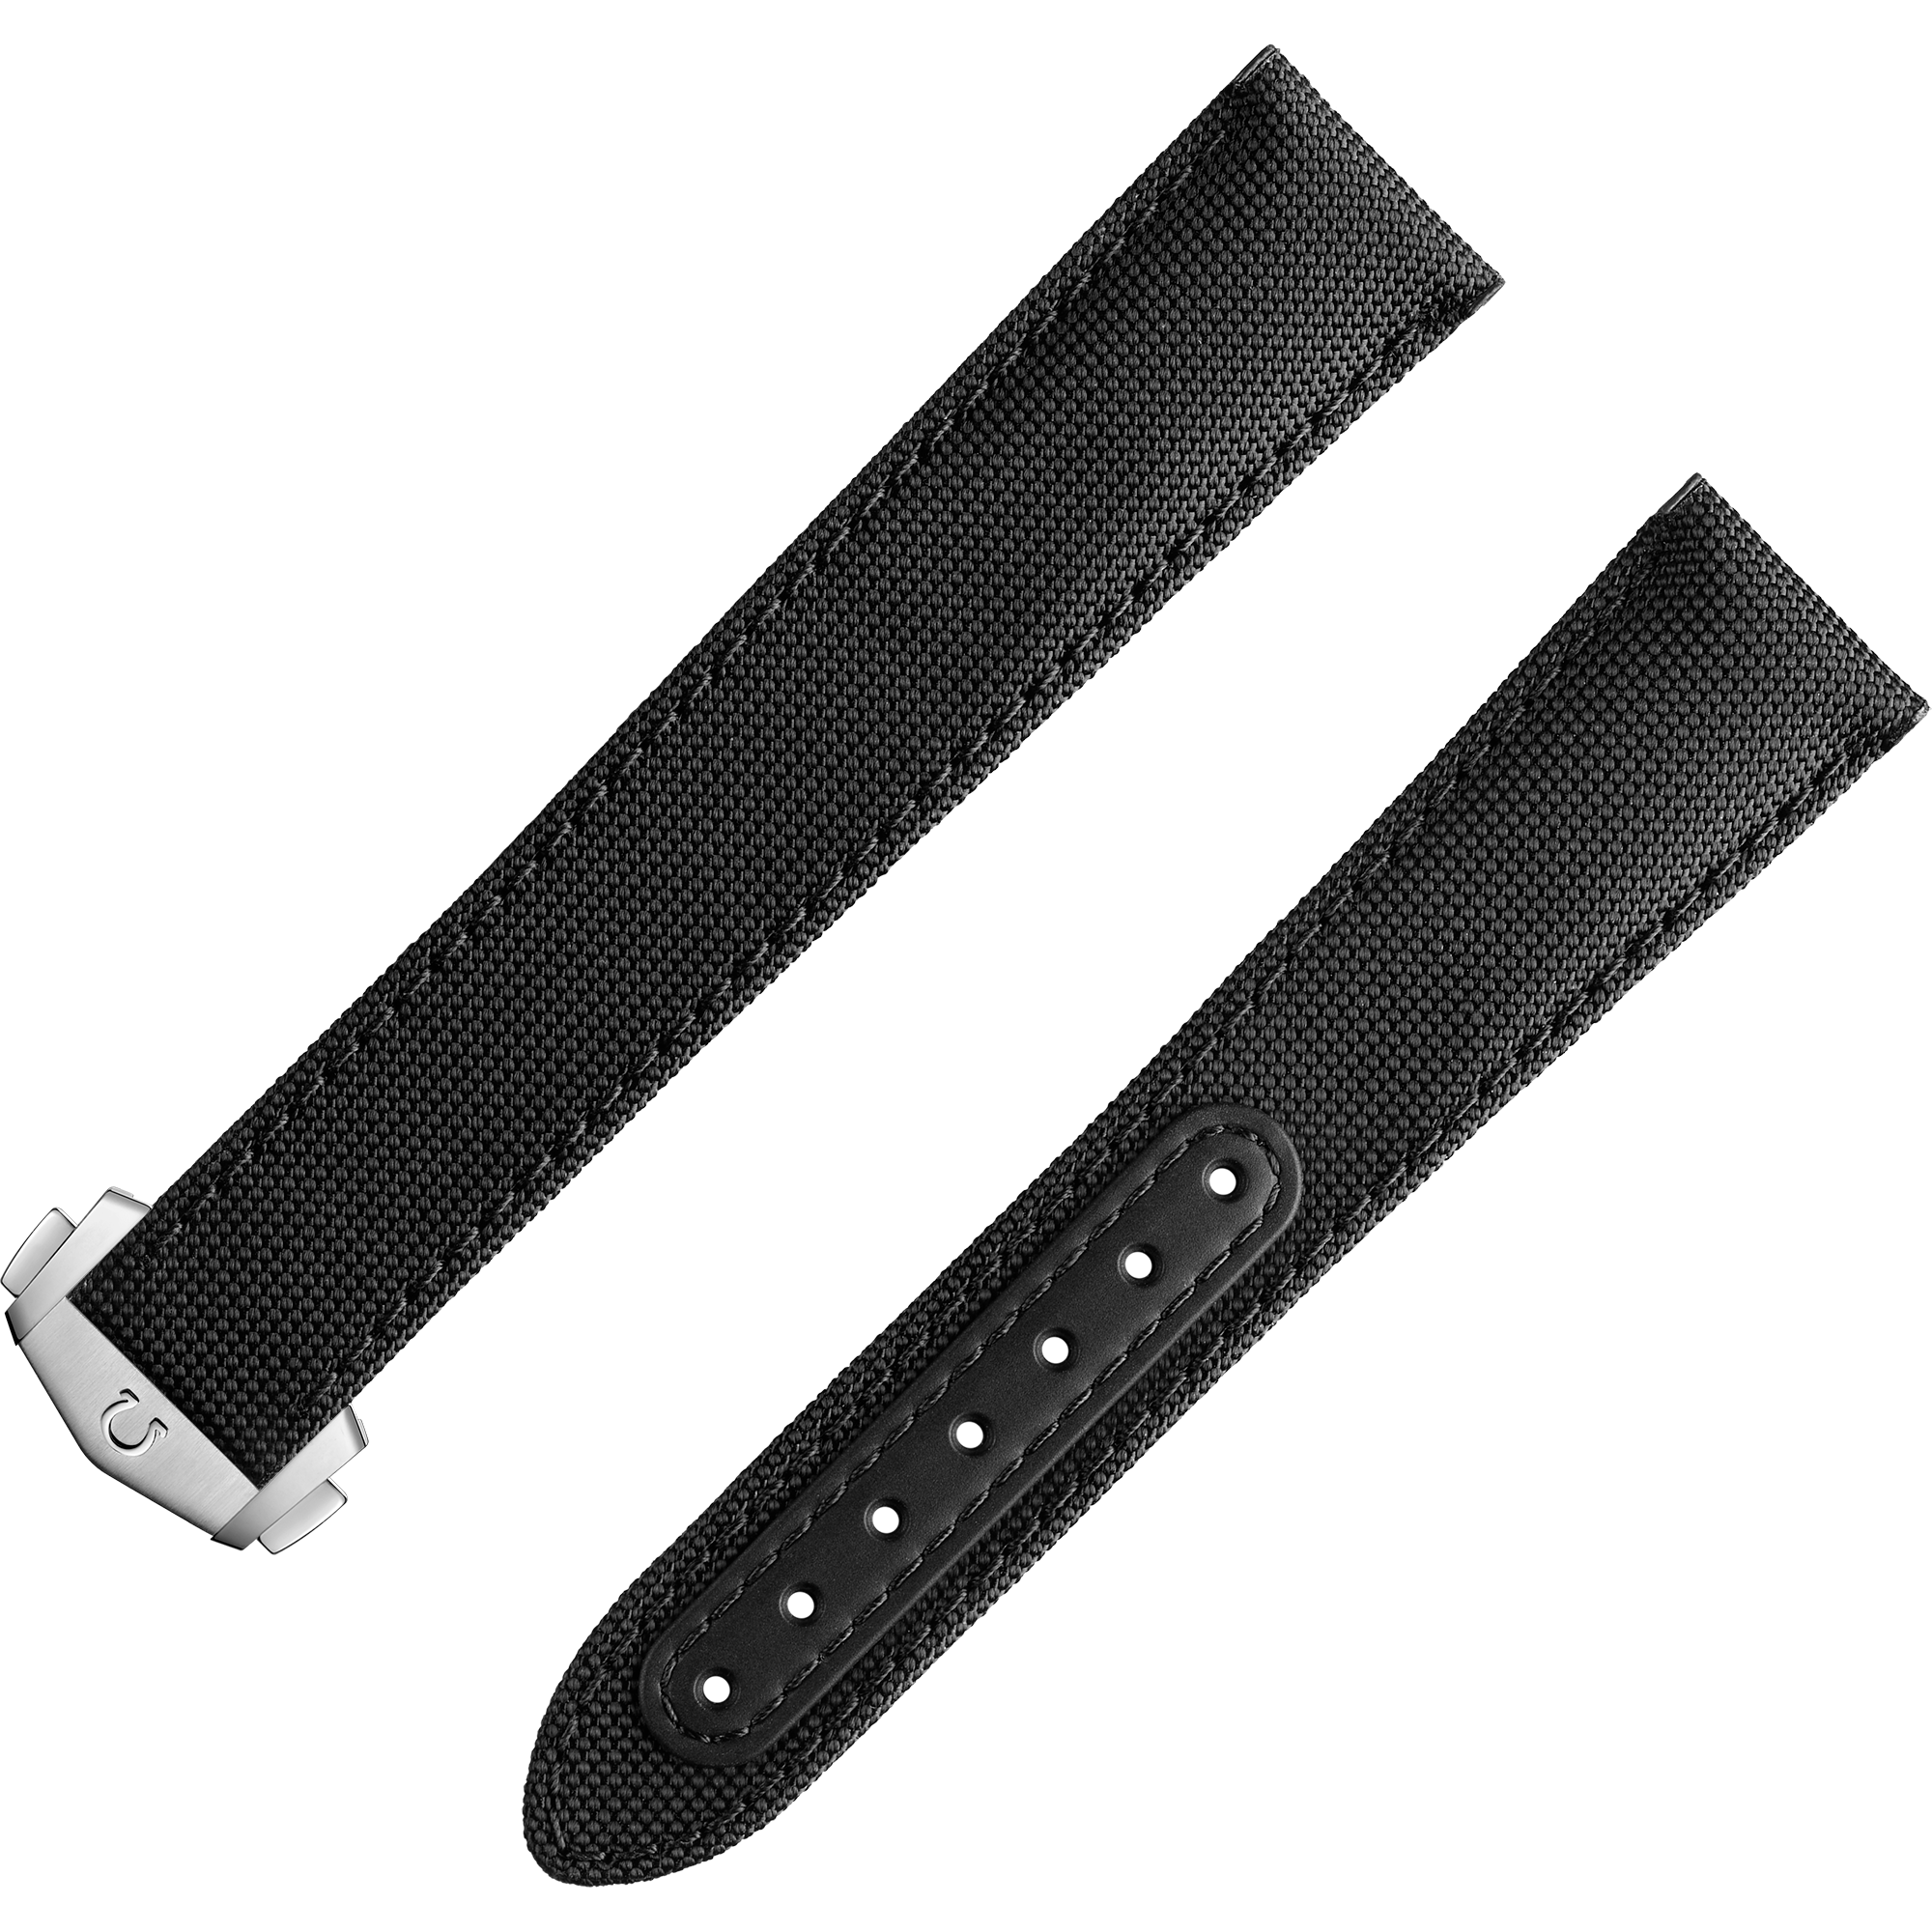 Two-piece strap - Speedmaster Moonwatch black fabric strap with foldover clasp - 032CWZ014117